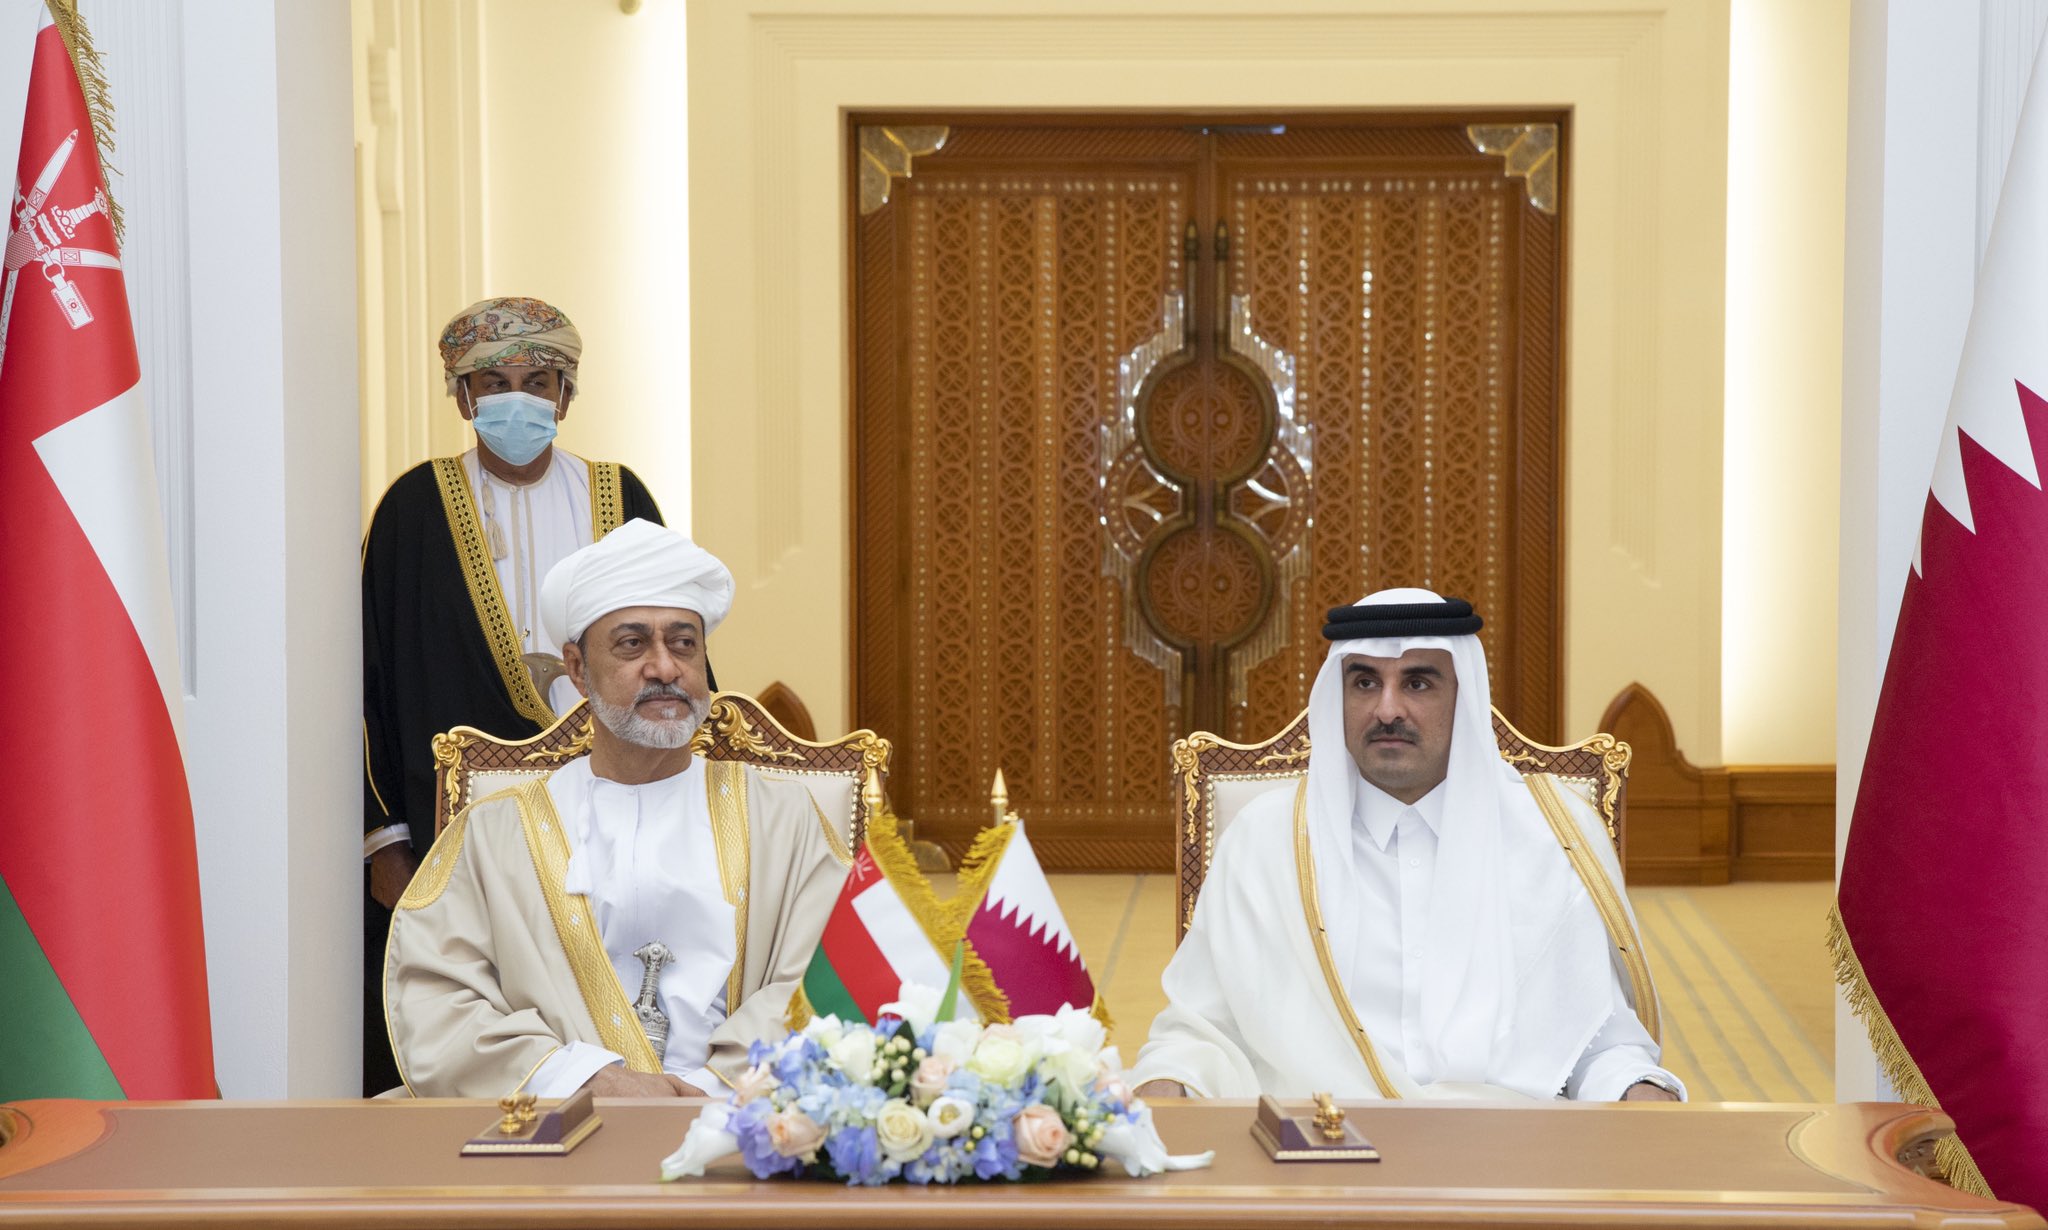 Amir, the Sultan of Oman Witness Signing of Agreements